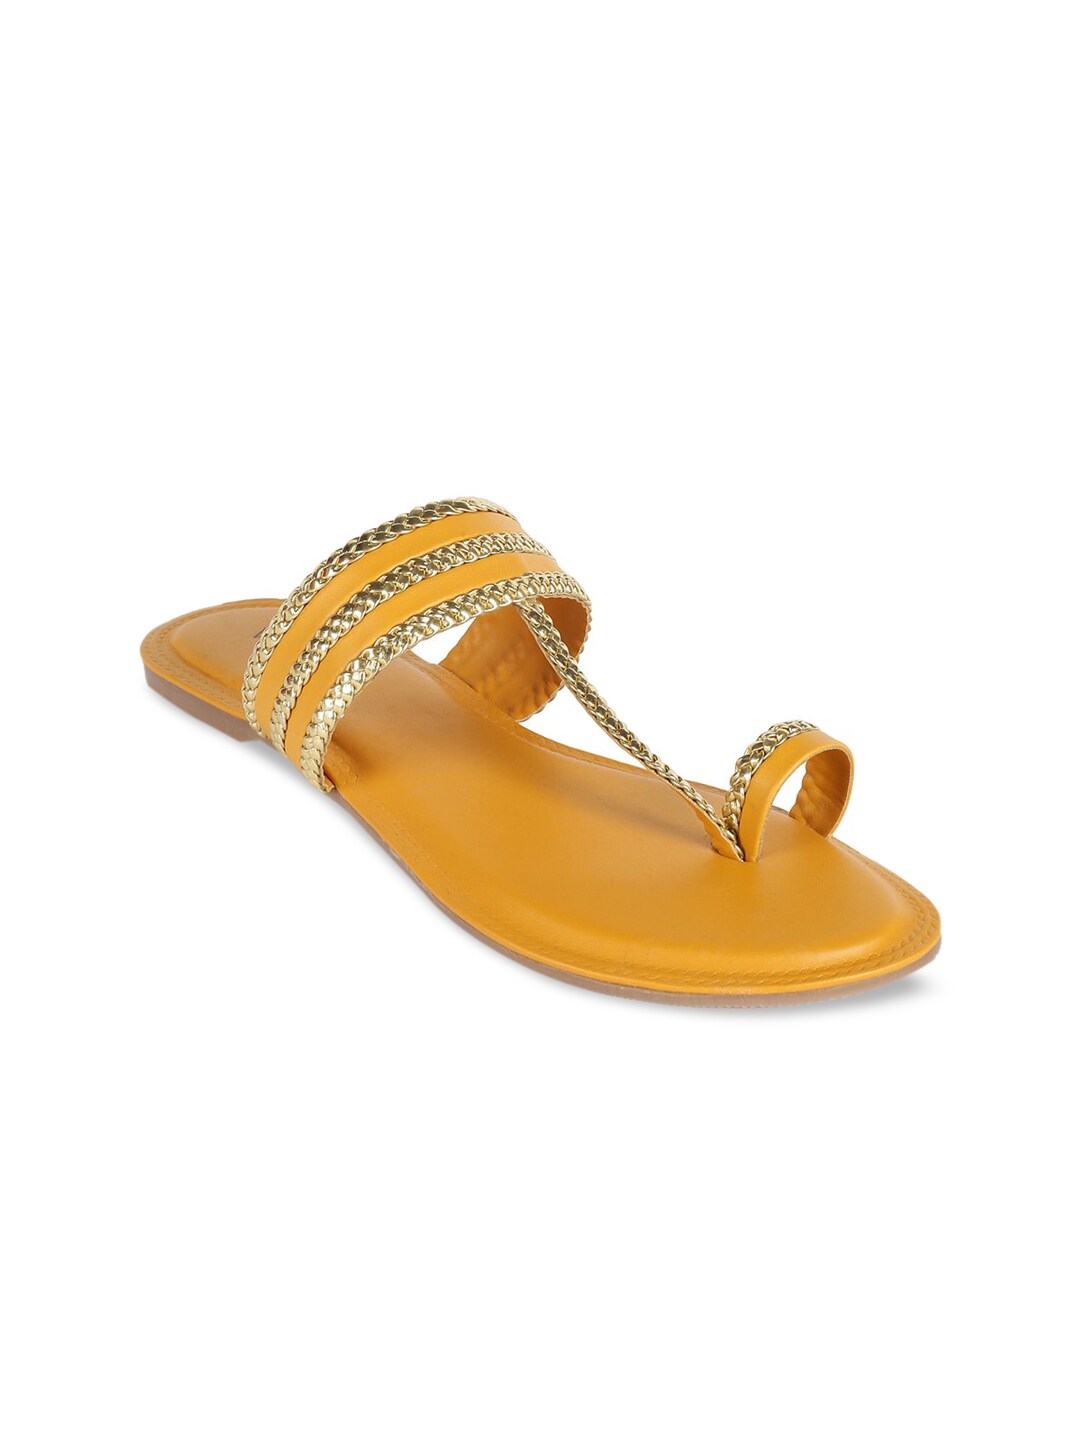 Vishudh Women Mustard Yellow & Gold-Toned Embellished One Toe Flats Price in India